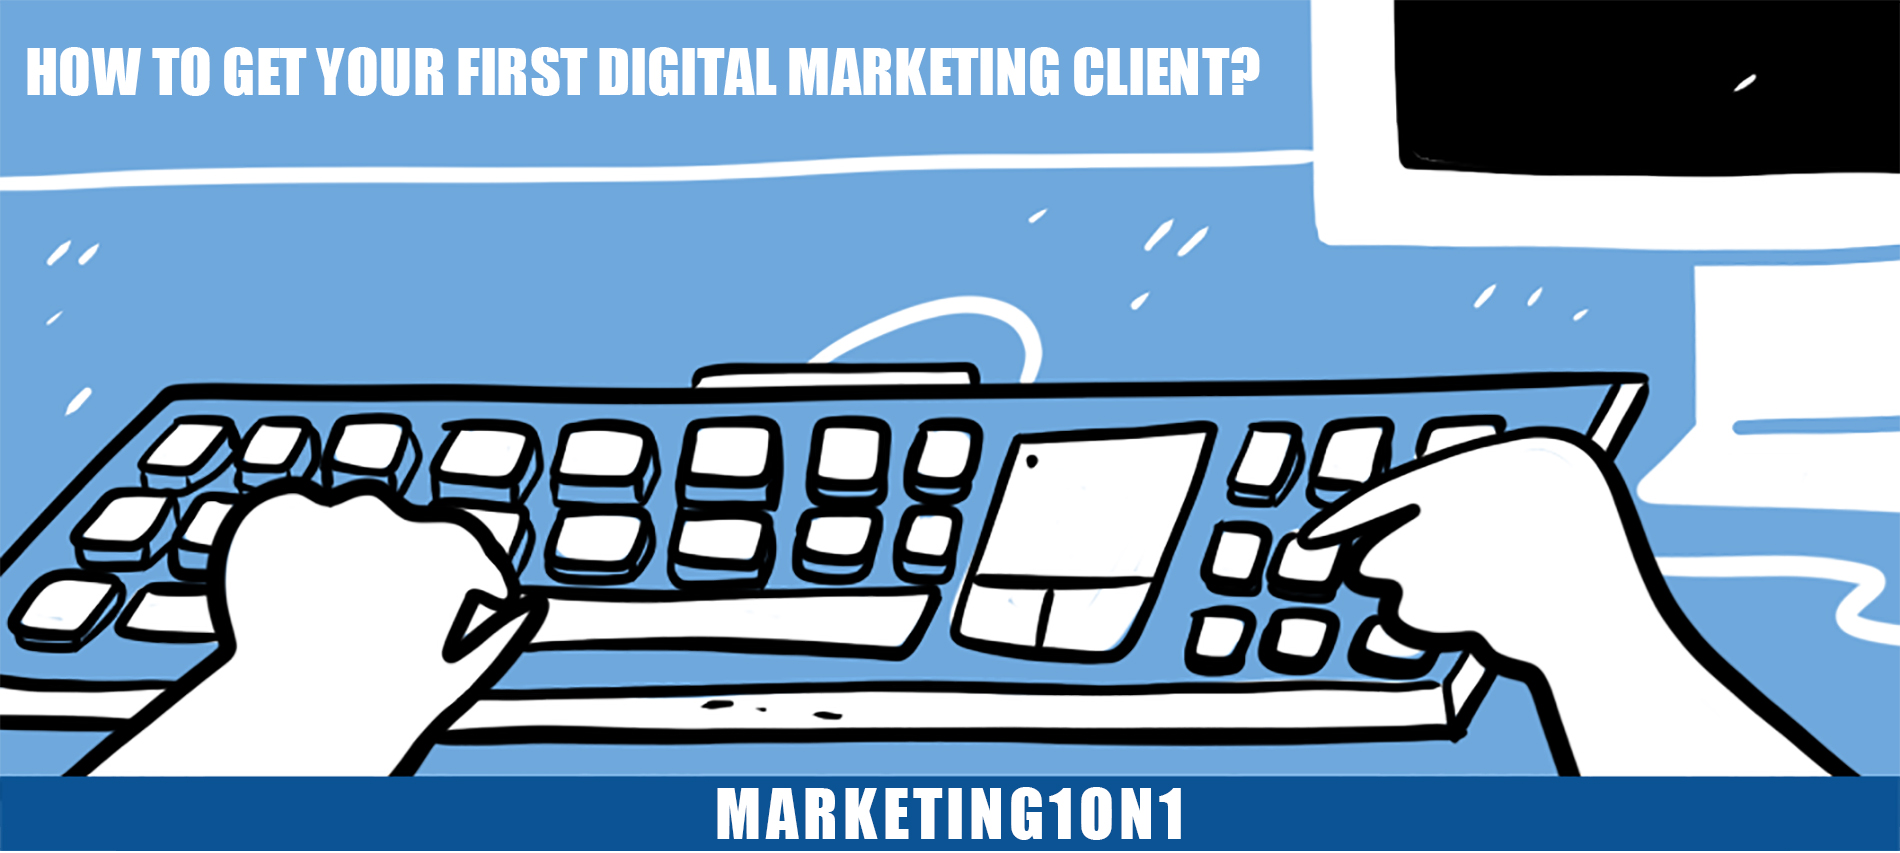 How to get your first digital marketing client?